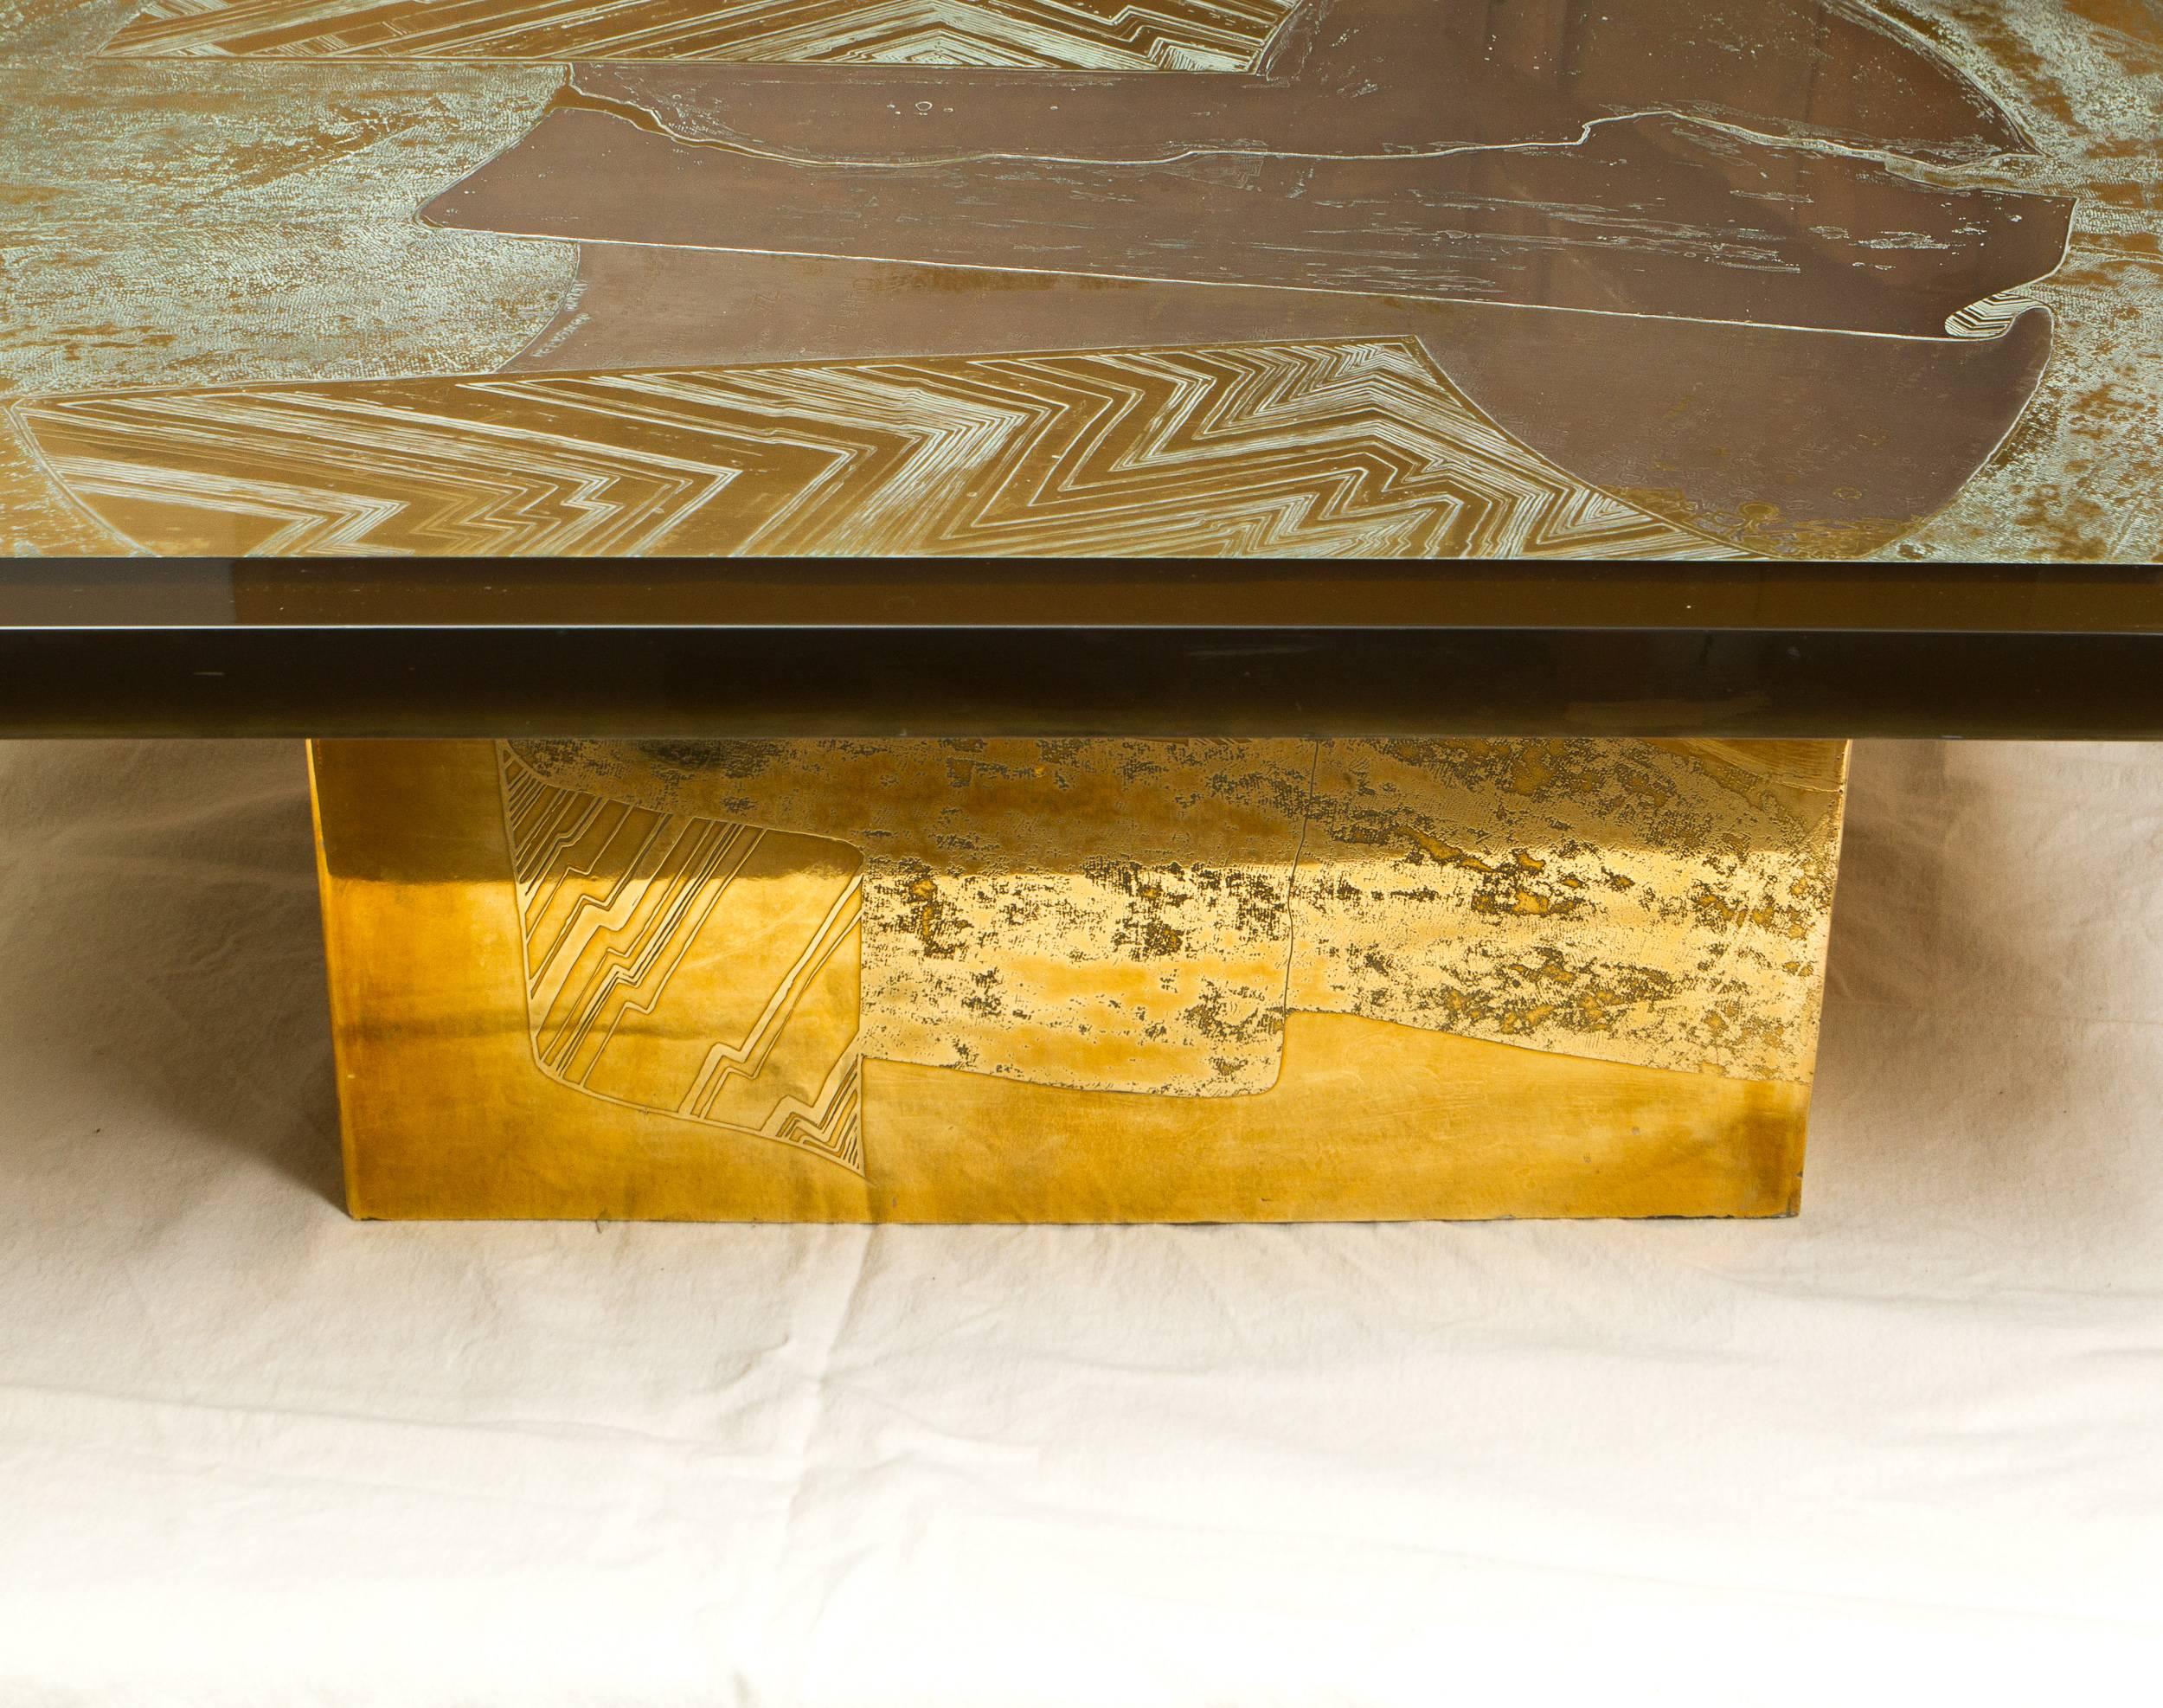 Stunning acid etched brass polish and silvered coffee table by Armand Jonckers depicting an Asian inspired scroll. Resting on a beautiful acid etched brass base.
Signed: Armand Jonkers.